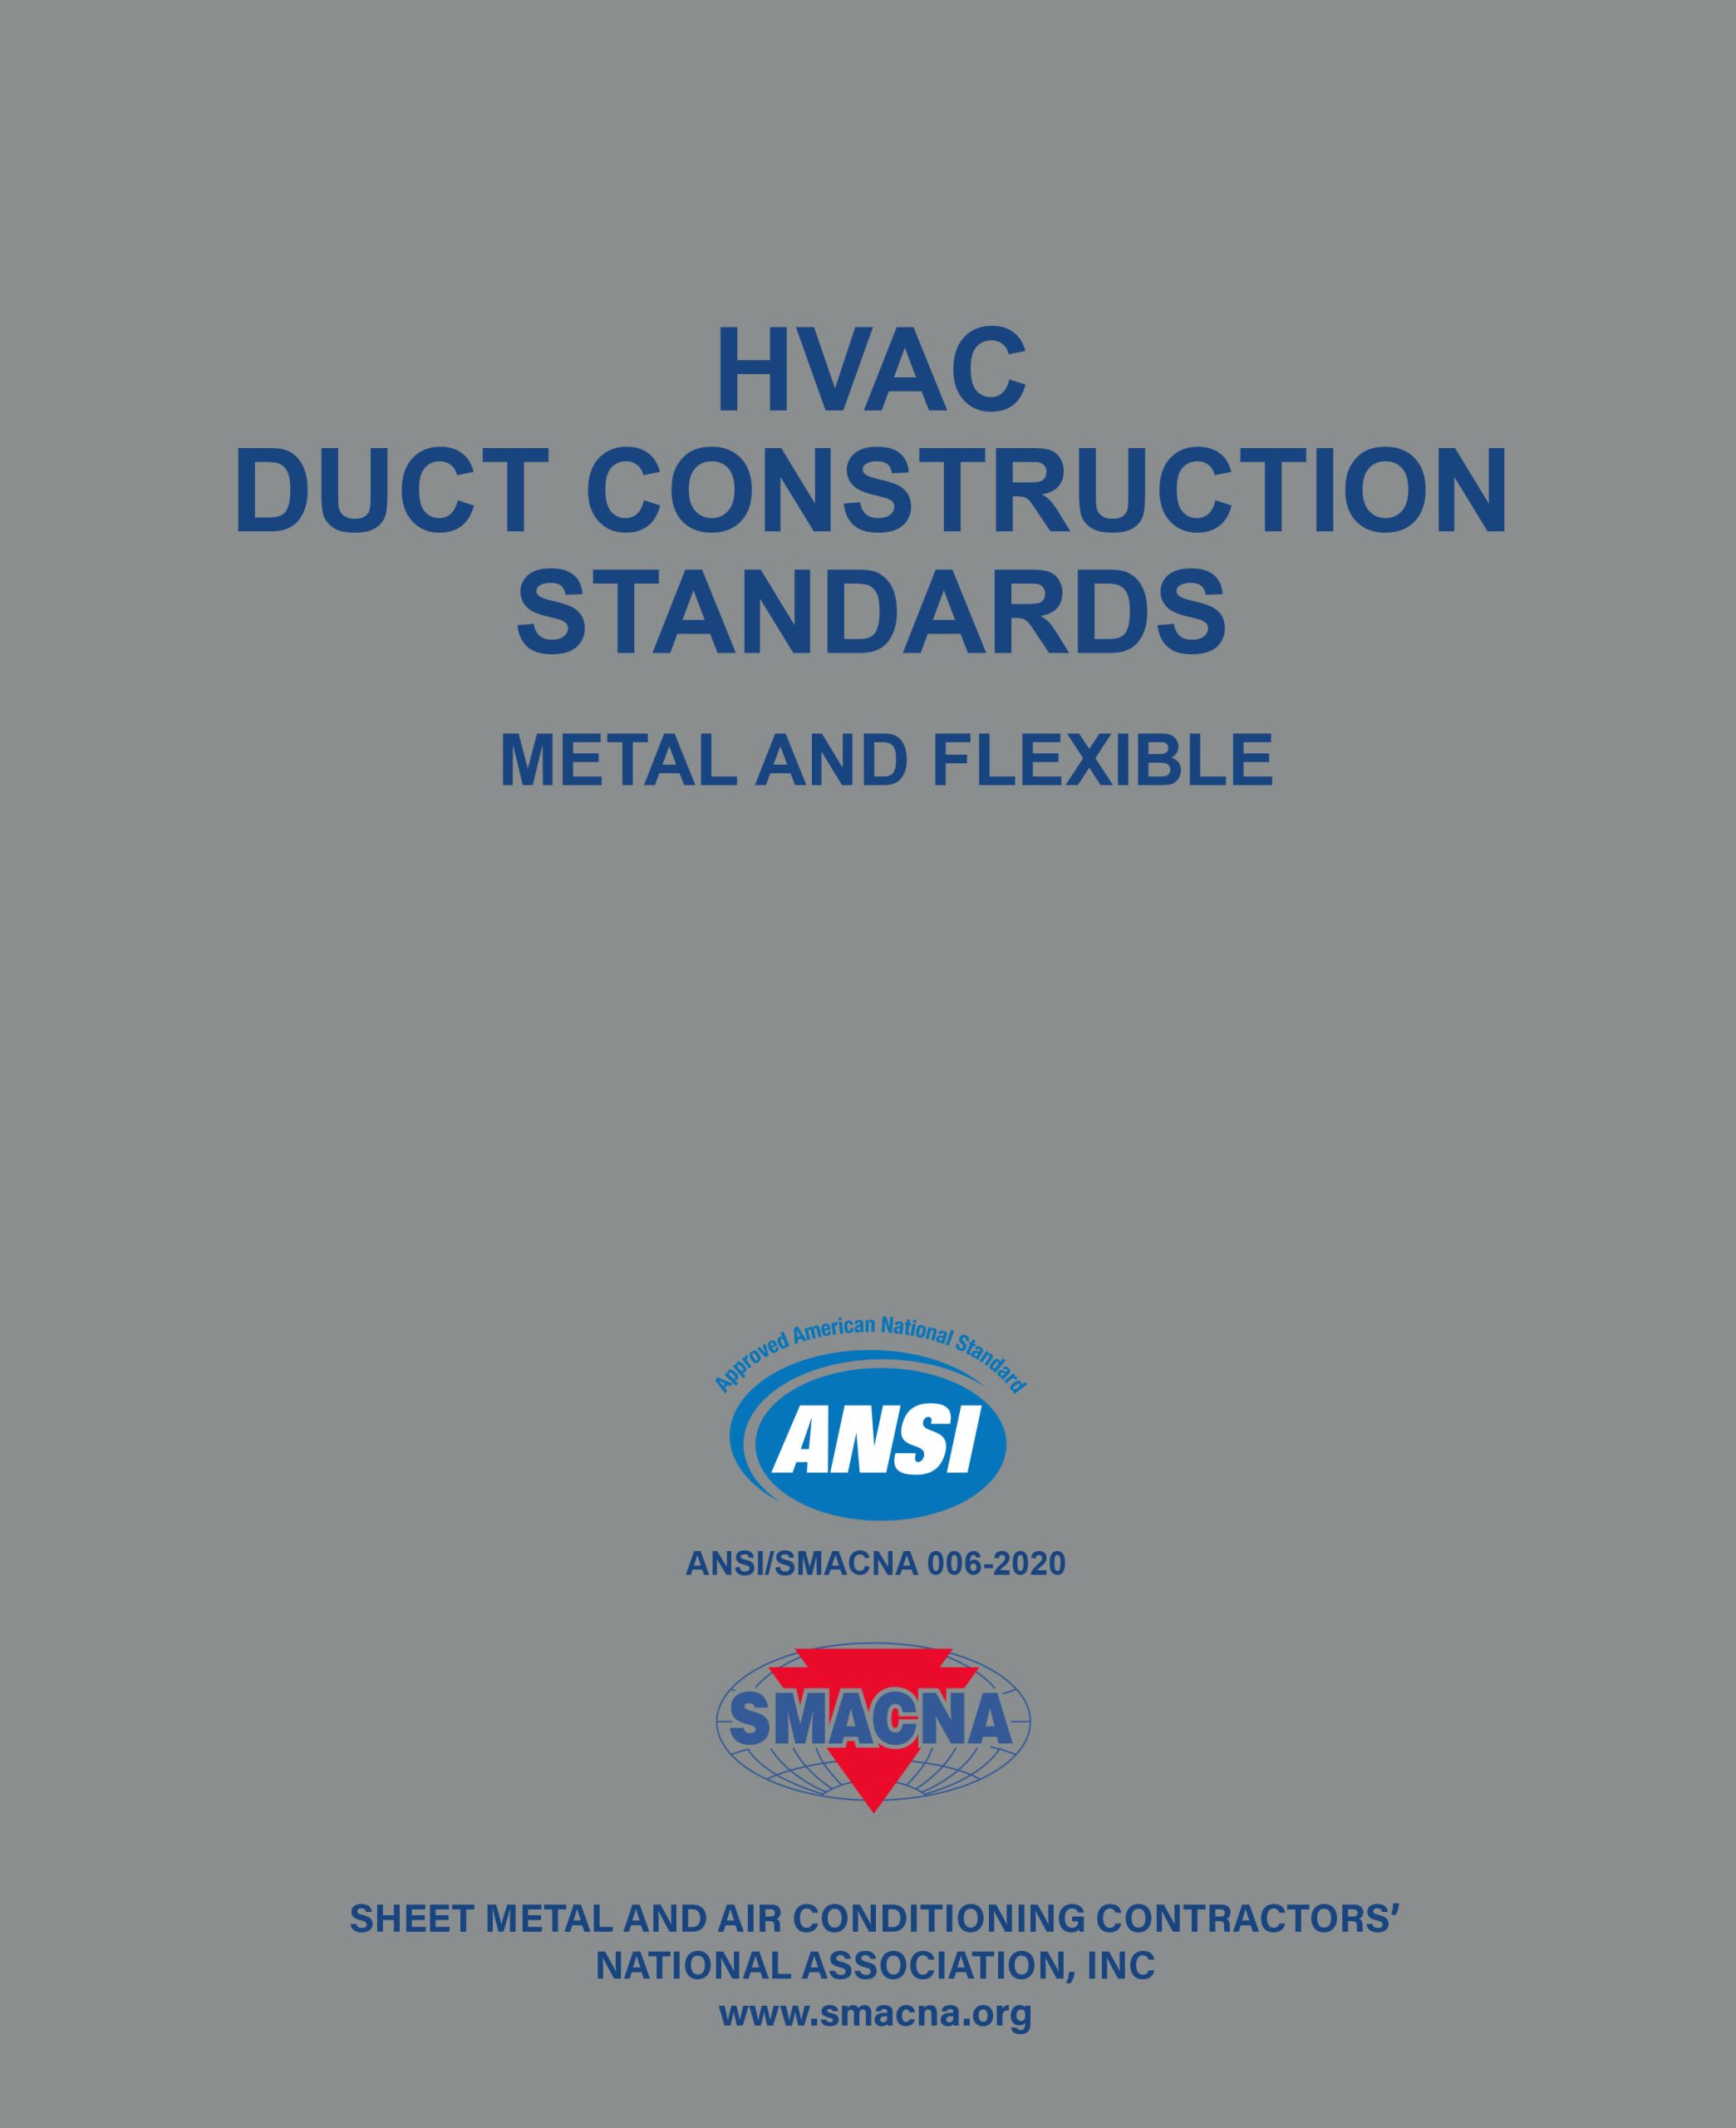 New Edition of the HVAC Duct Construction Standards Released